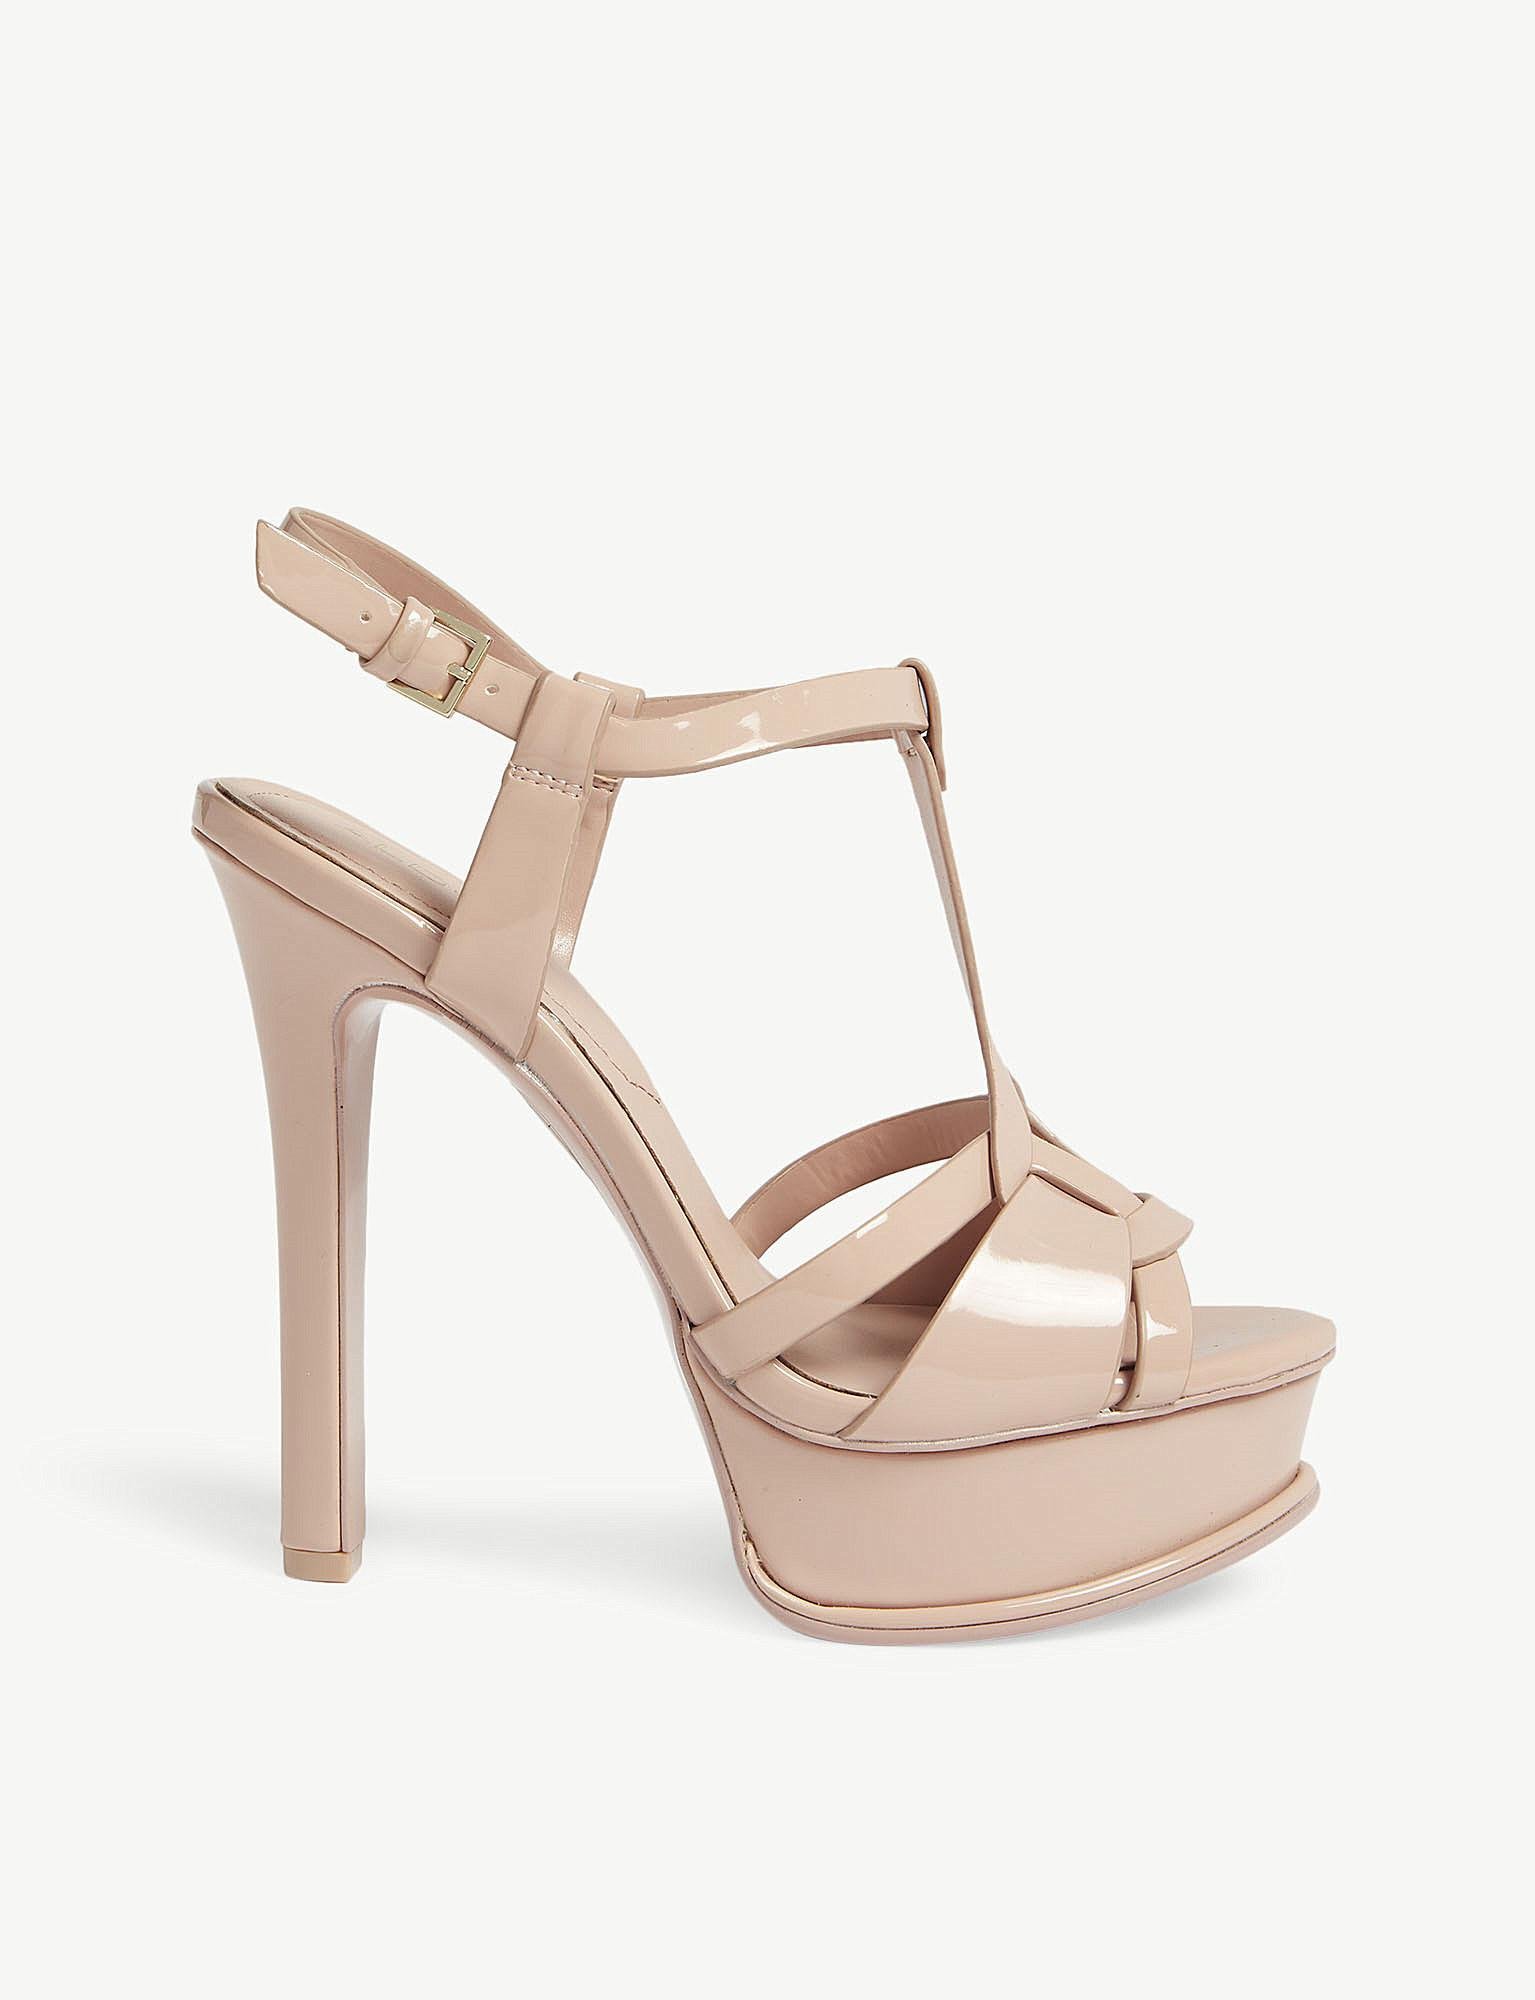 ALDO Synthetic Chelly High Heel Sandals in Light Pink (Pink) - Lyst